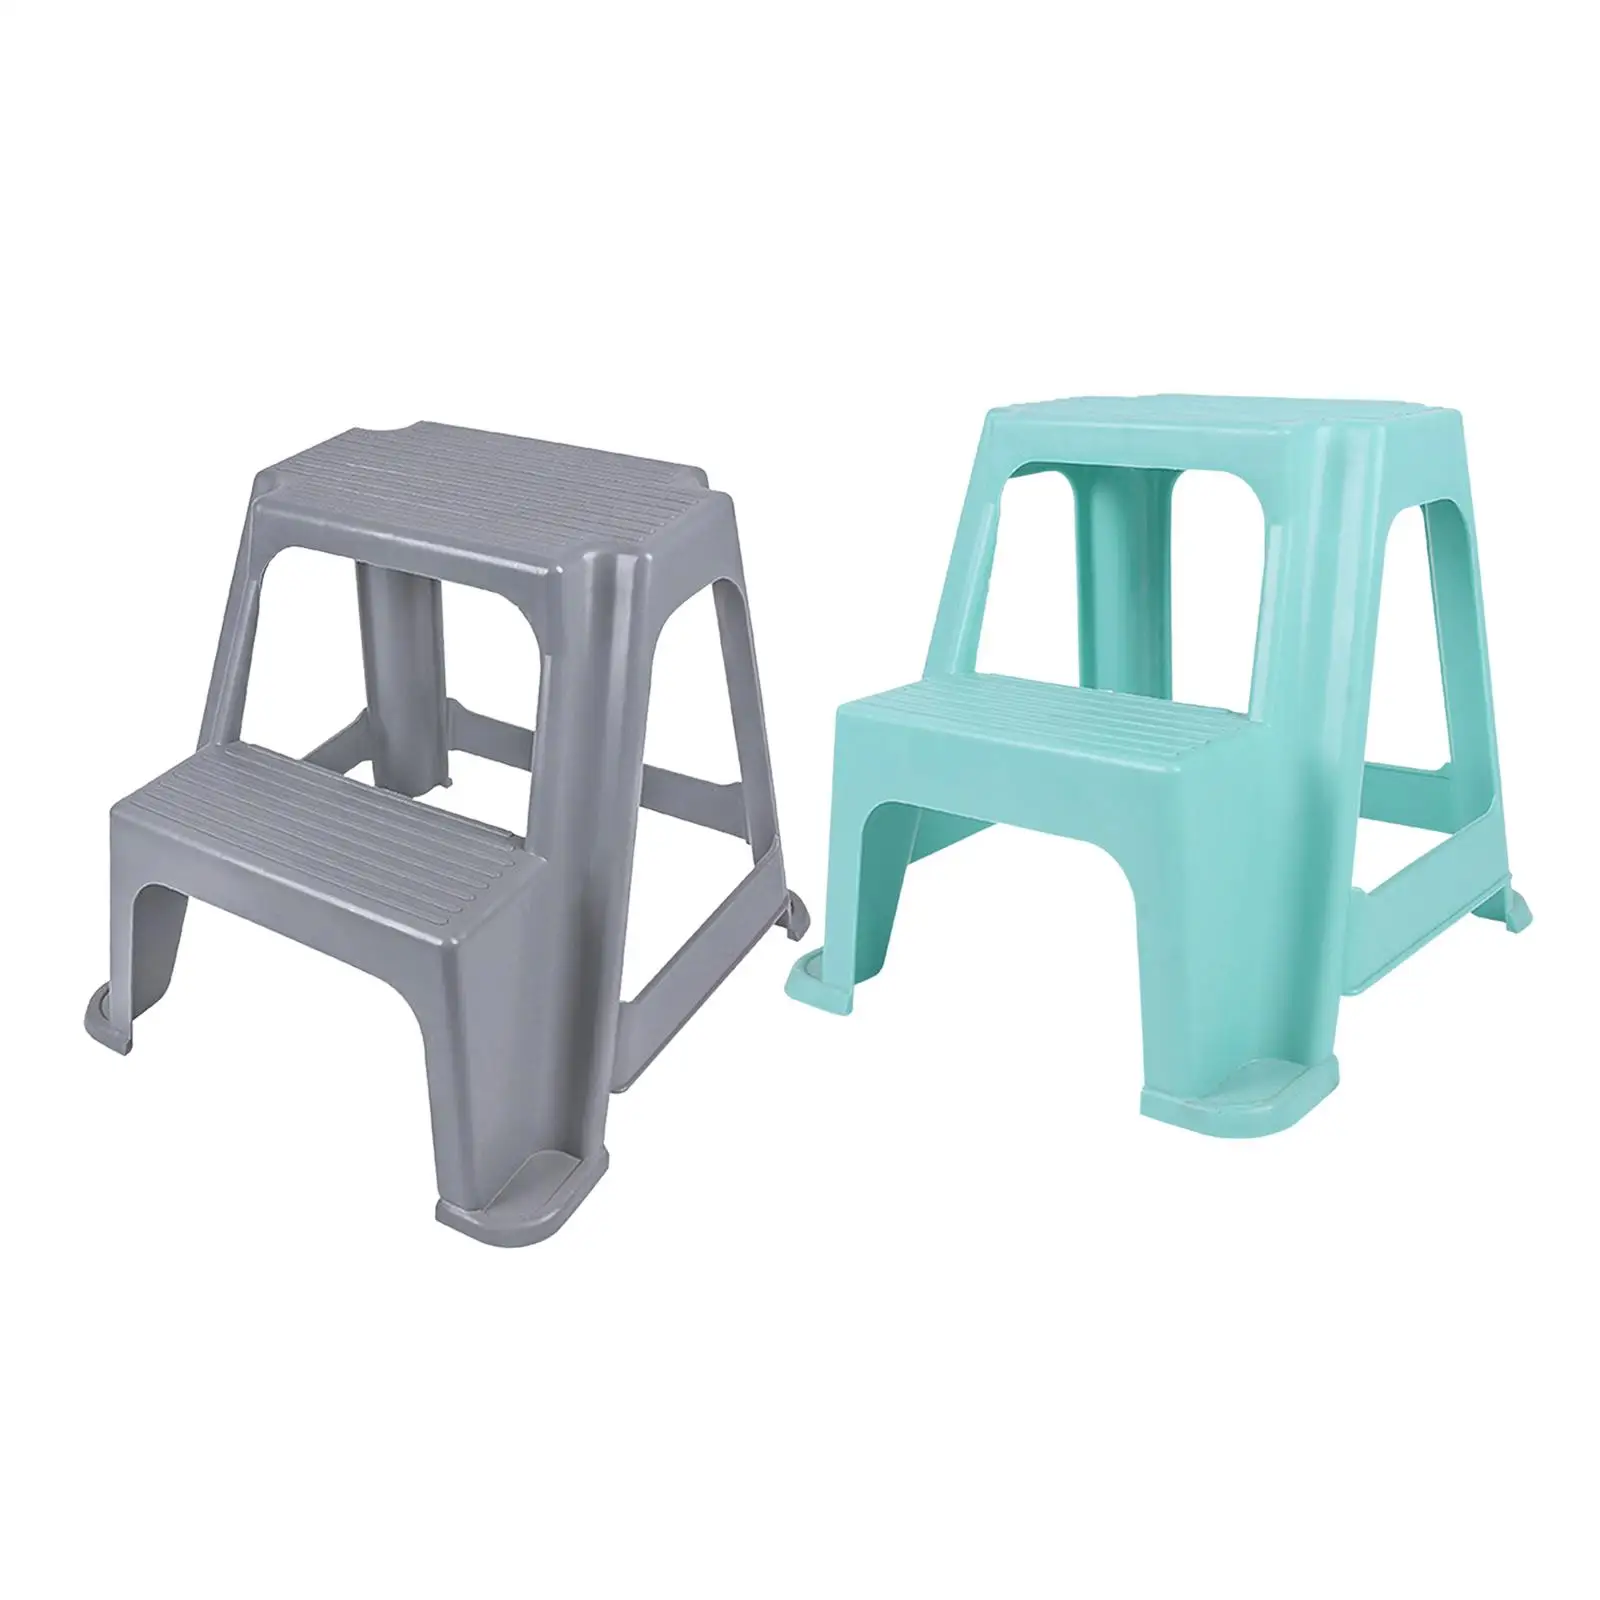 2 Step Stool Lightweight Toilet Stool Footstool Bedside Step Stool Two Step Stool for Kids Toddlers Seniors Dogs Kitchen